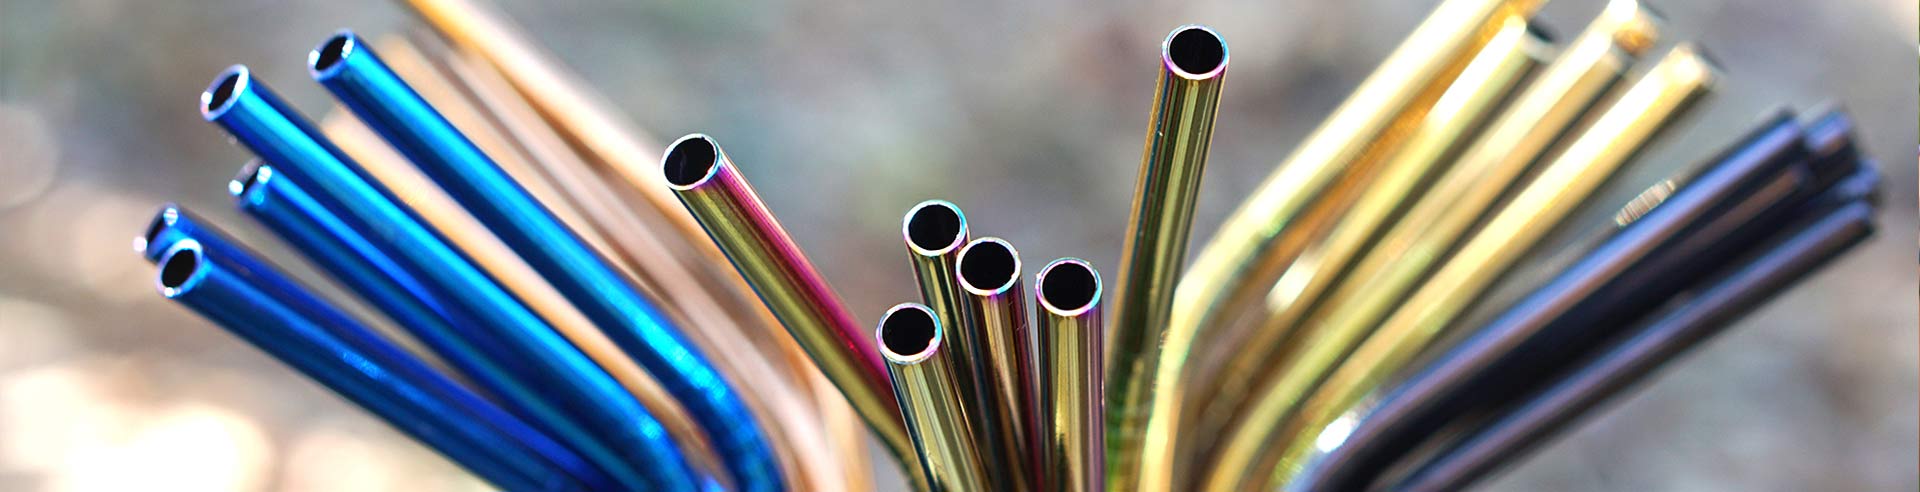 Choosing the right length and width for your reusable straws